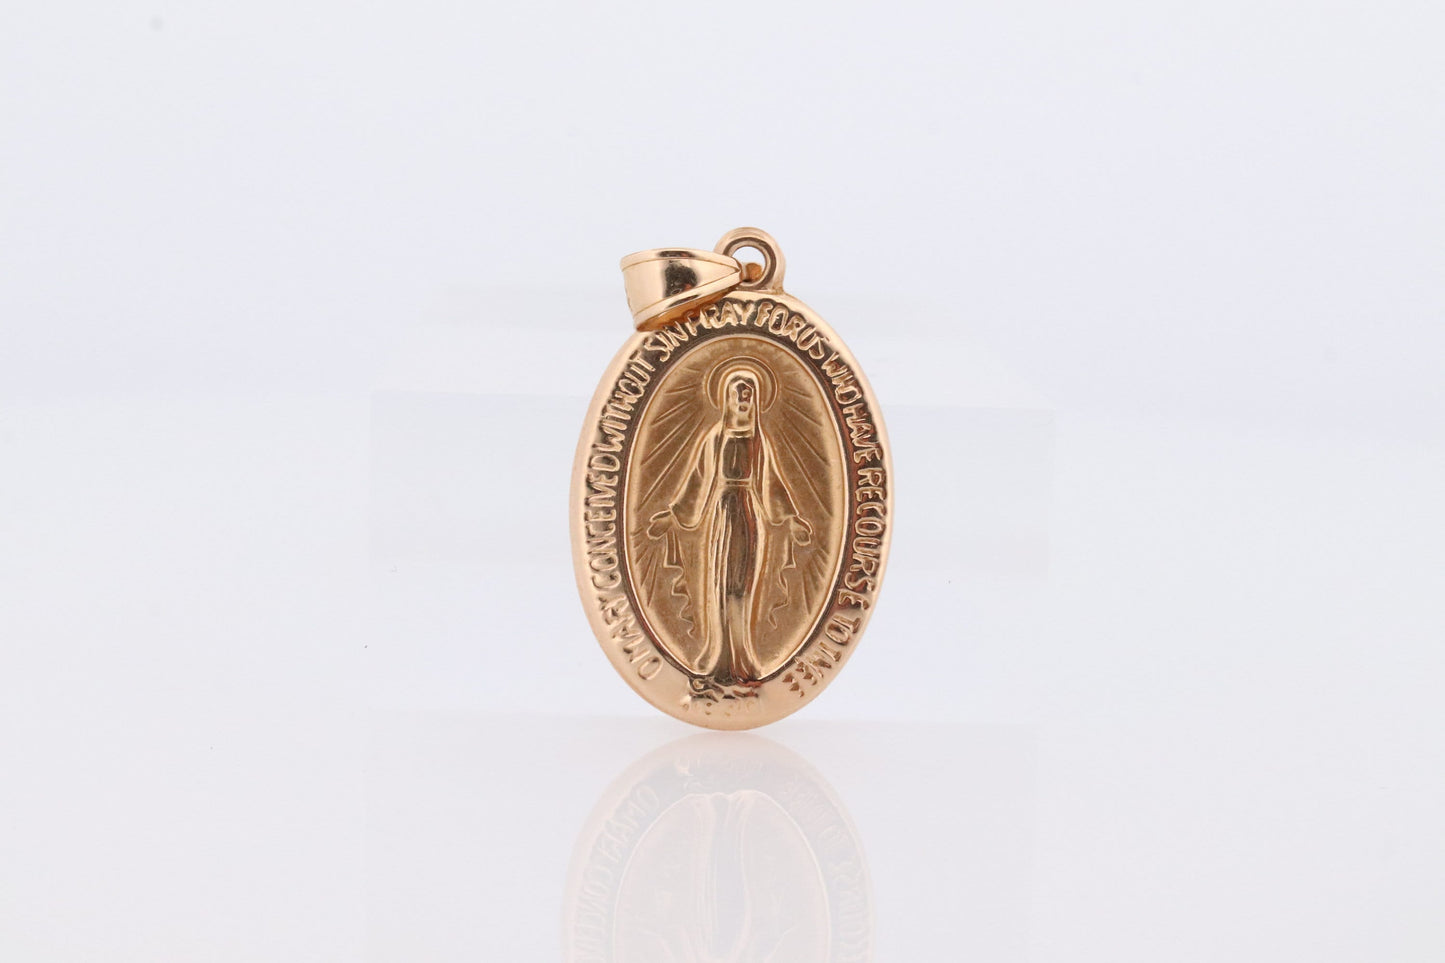 Vintage 14k Yellow Gold Pendant. Marian Cross. Madonna Pendant. VIRGIN Mary Pendant. Mother Medallion for Necklace or Medal st92(